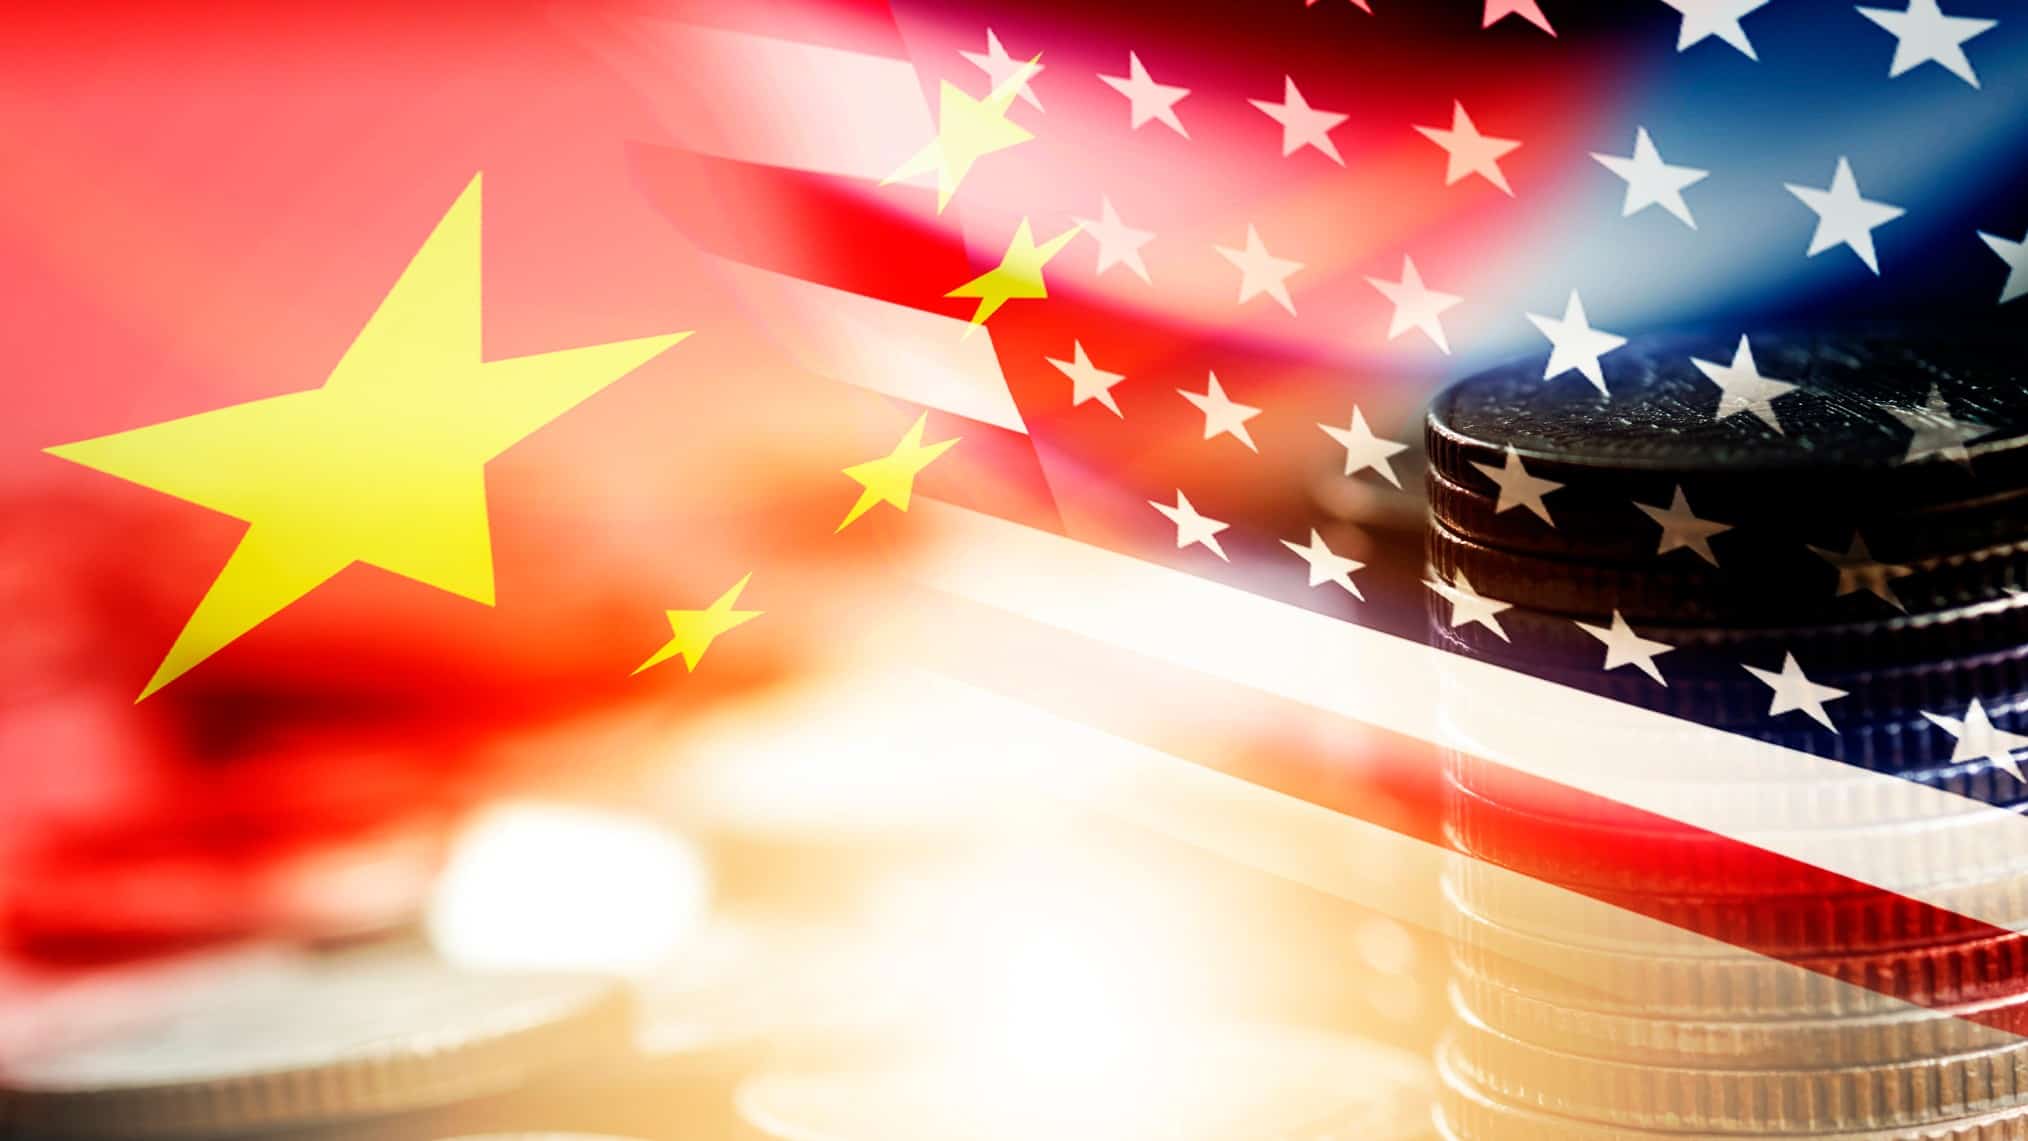 The stars from a Chinese flag meet those on a US flag, inducating Chines shares trading on US stock market